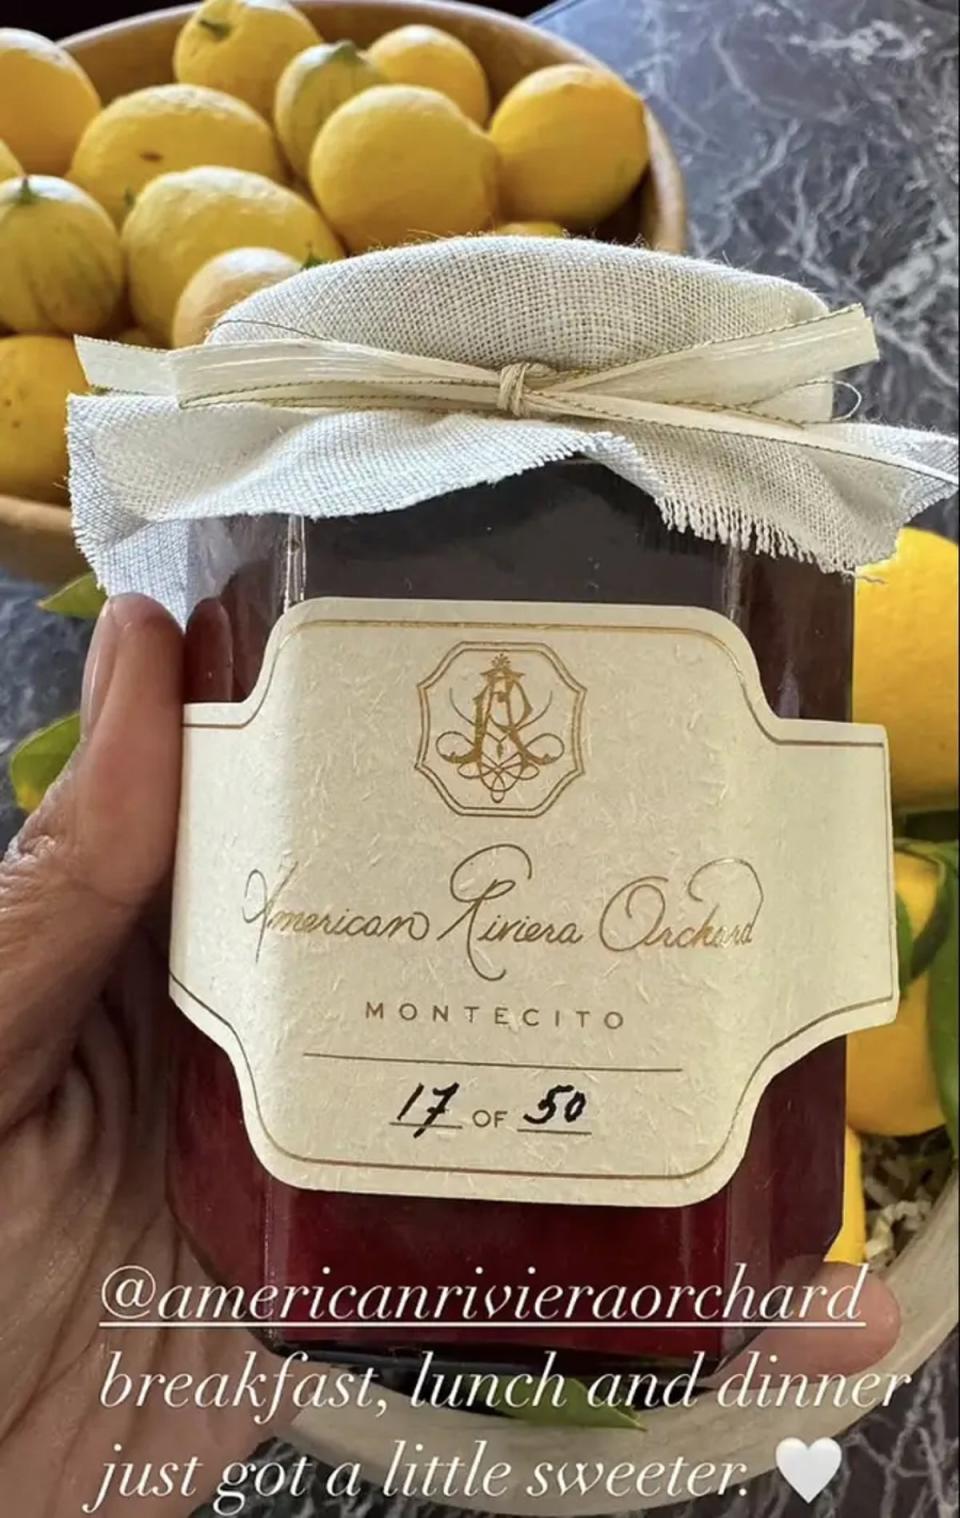 It is believed American Riviera Orchard will sell luxury lifestyle products (Tracy Robbins/Instagram)